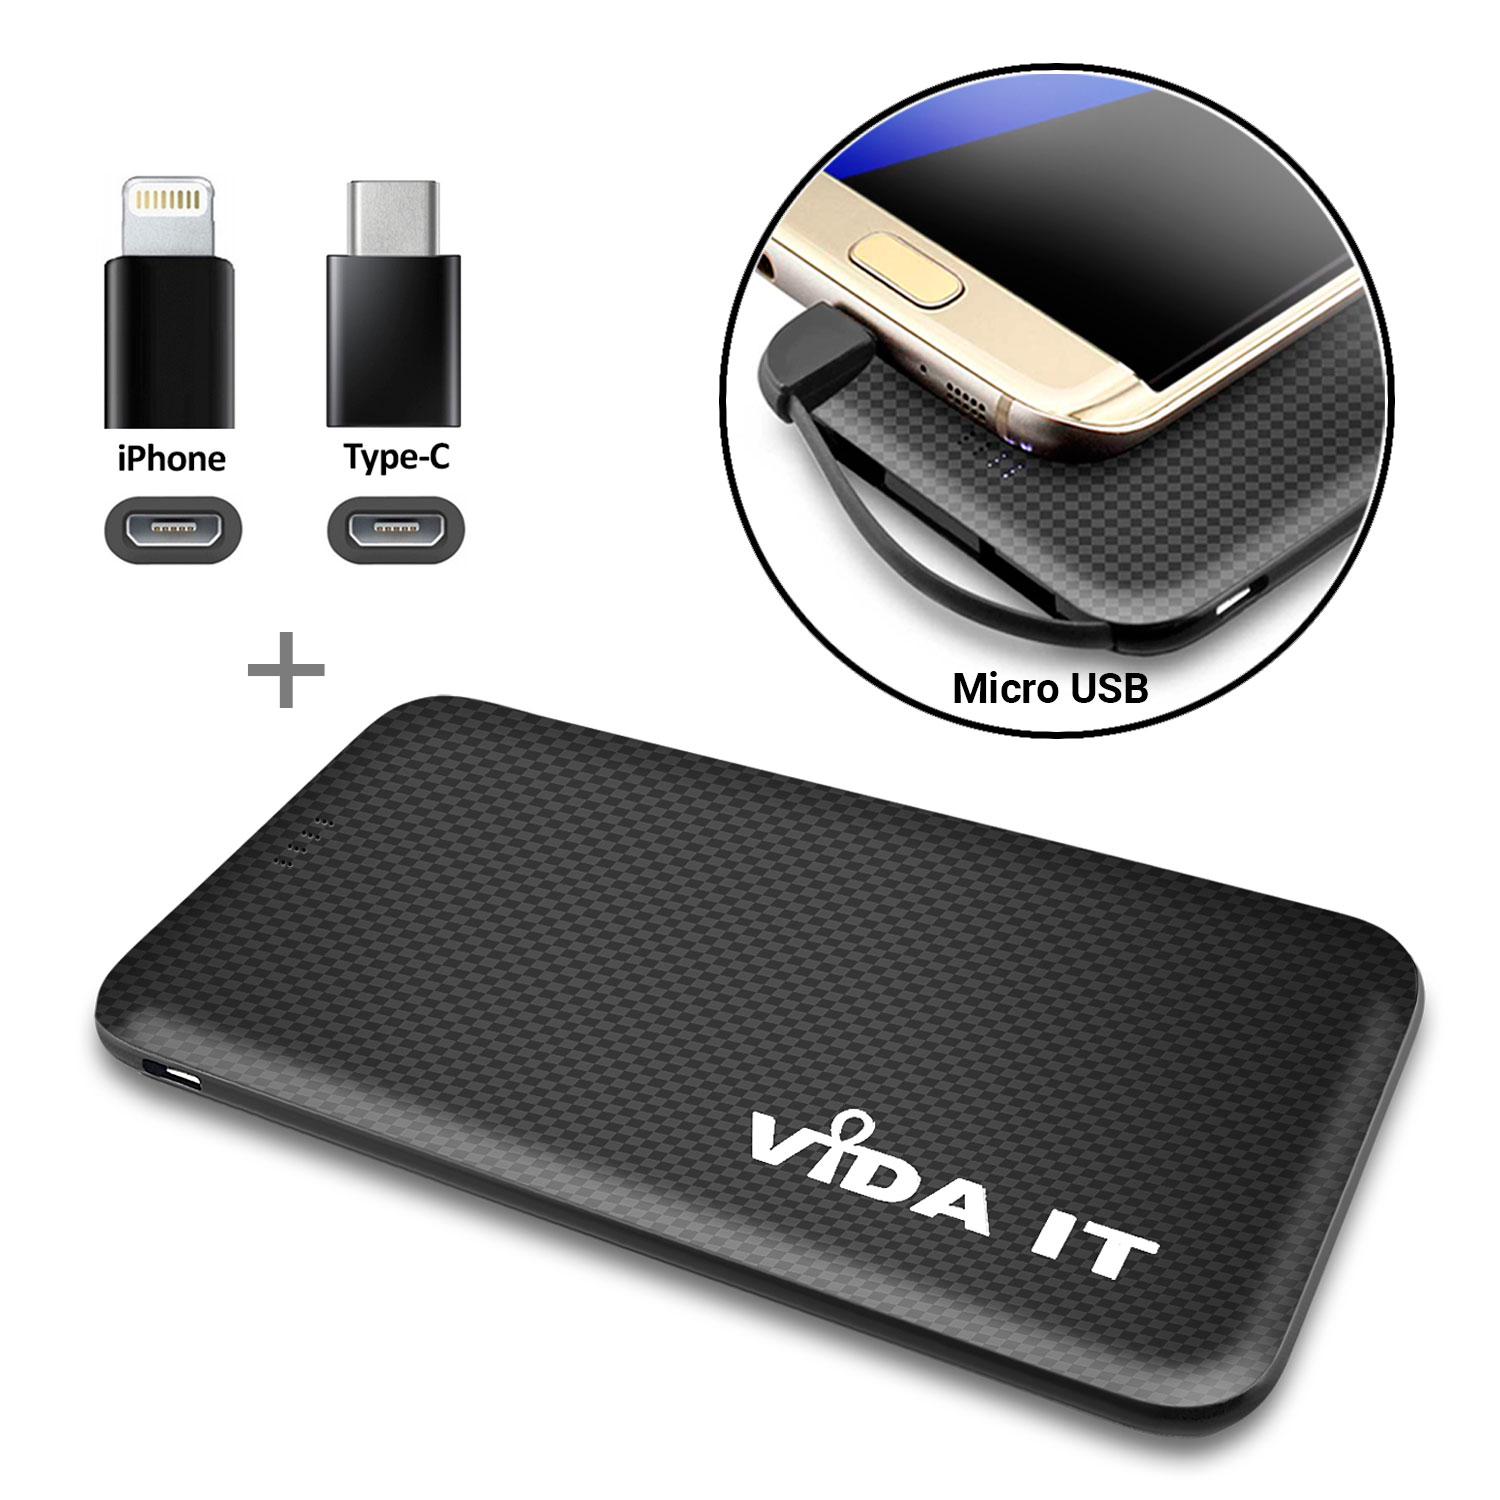 V502 Slim 9mm Dual Port 5000mAh Power Bank Portable External Emergency Battery Pack USB Charger with Built-in Micro USB cable plus Apple-and USB-C Adapters in Black Colour